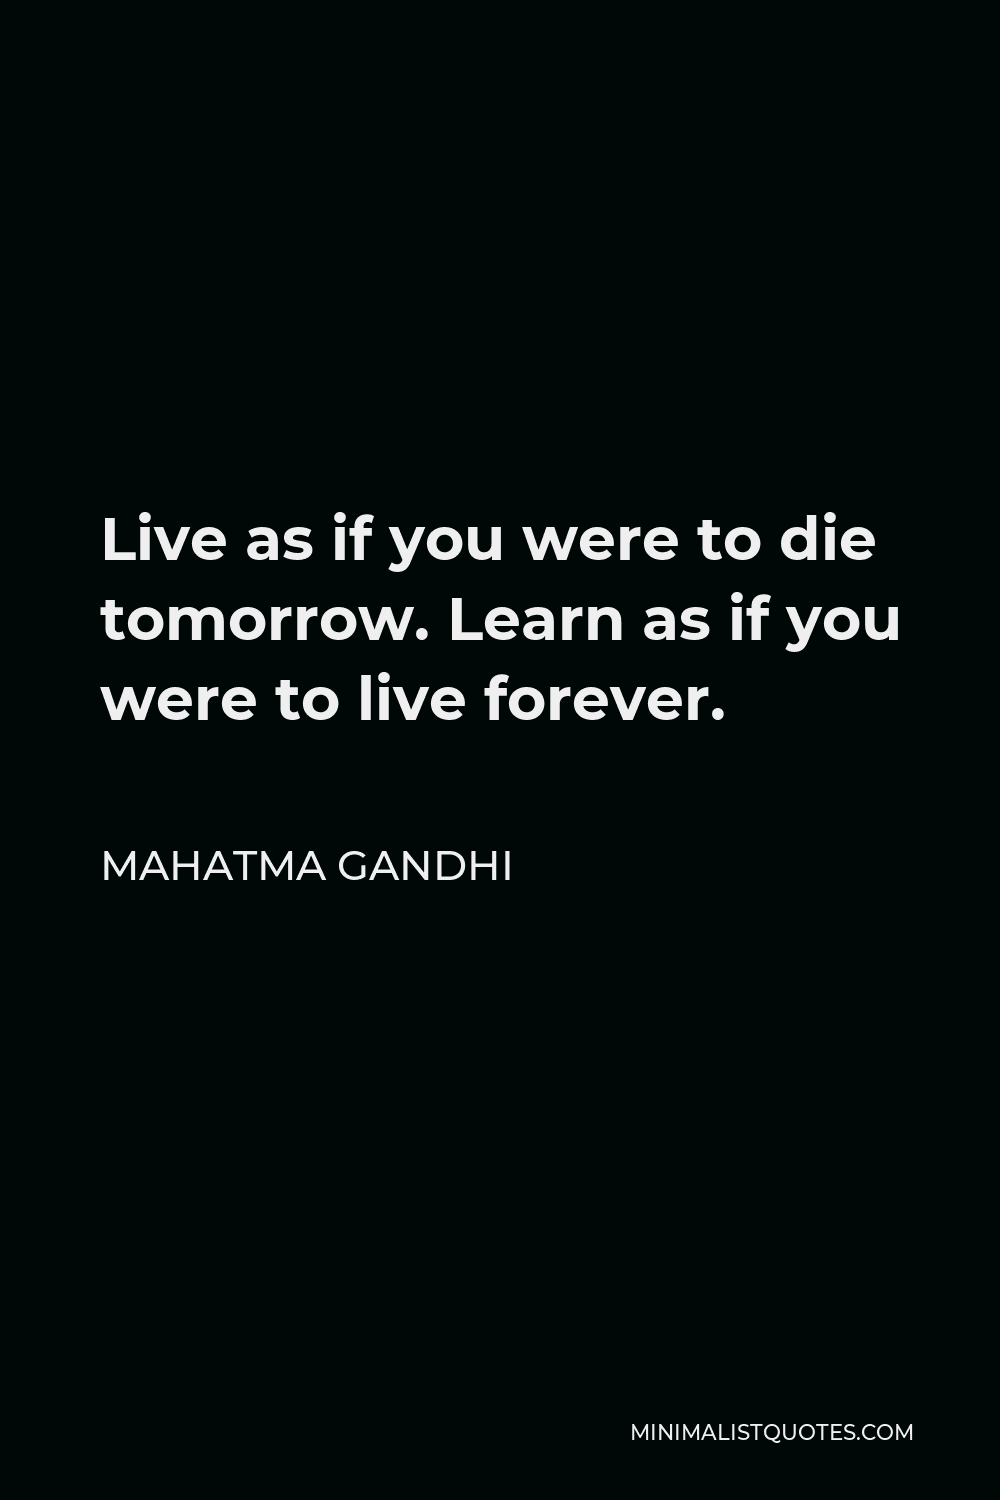 Mahatma Gandhi Quote Live As If You Were To Die Tomorrow Learn As If You Were To Live Forever